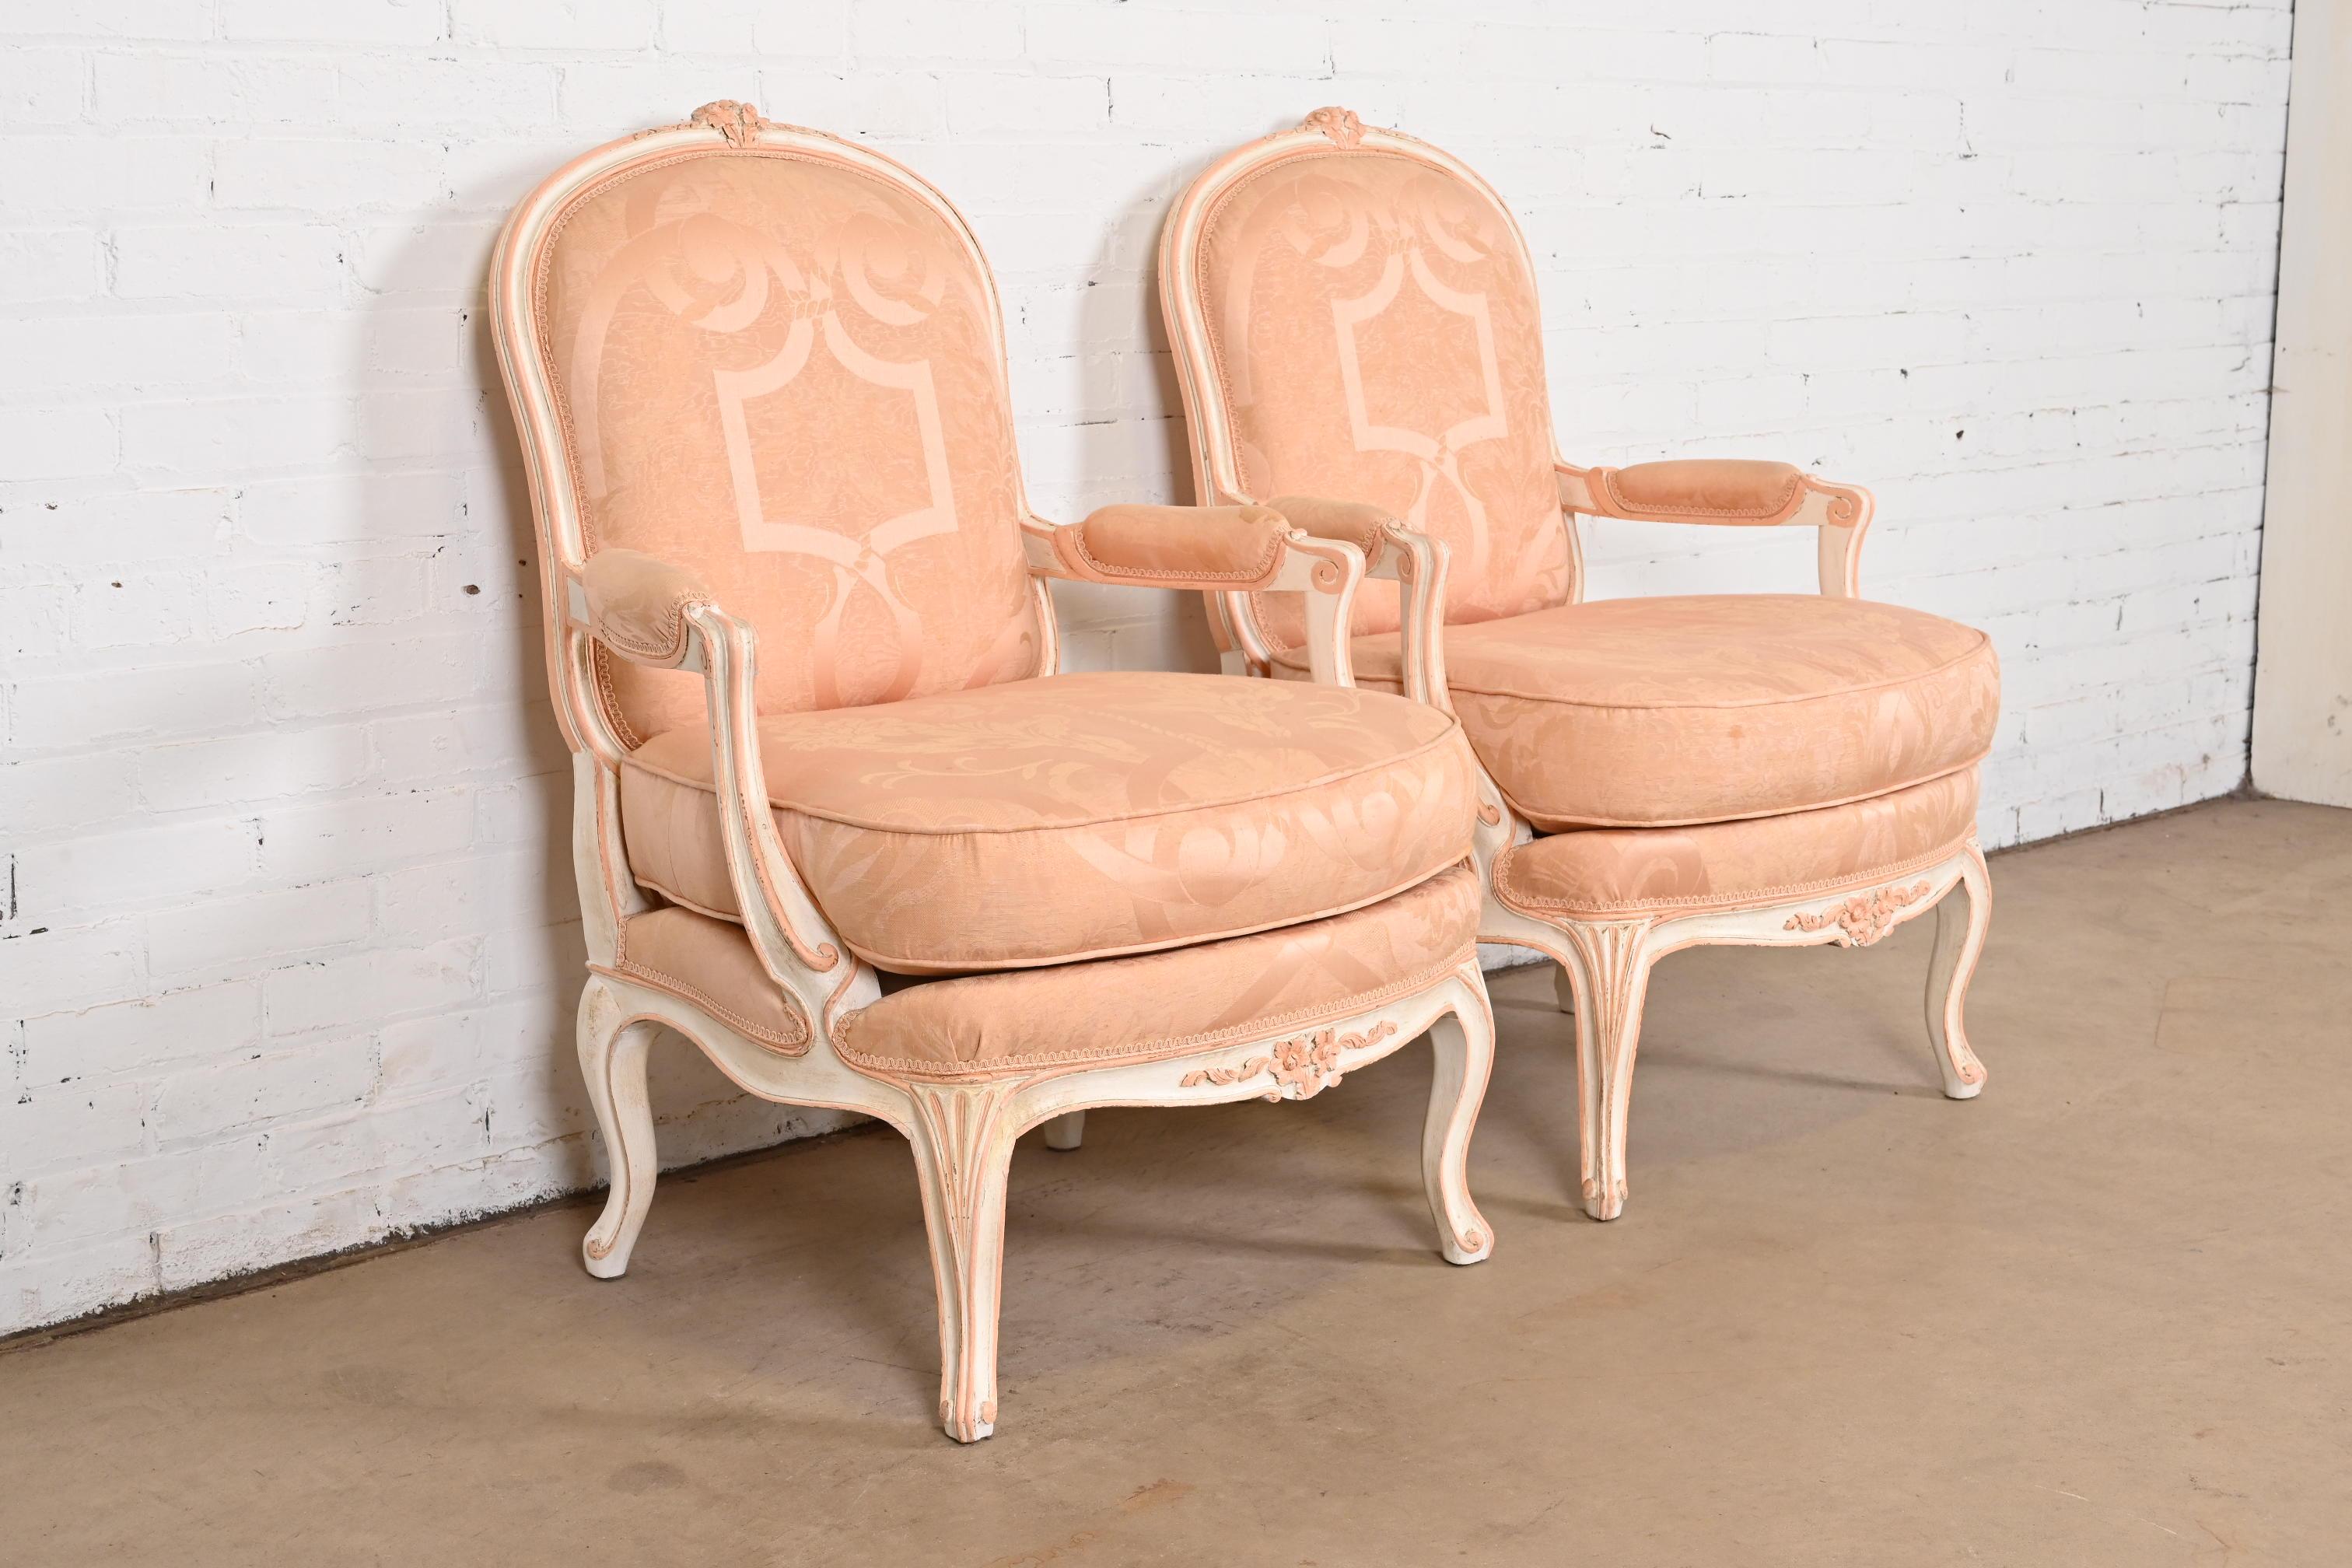 French Provincial Louis XV Carved Painted Walnut Fauteuils, Pair For Sale 3